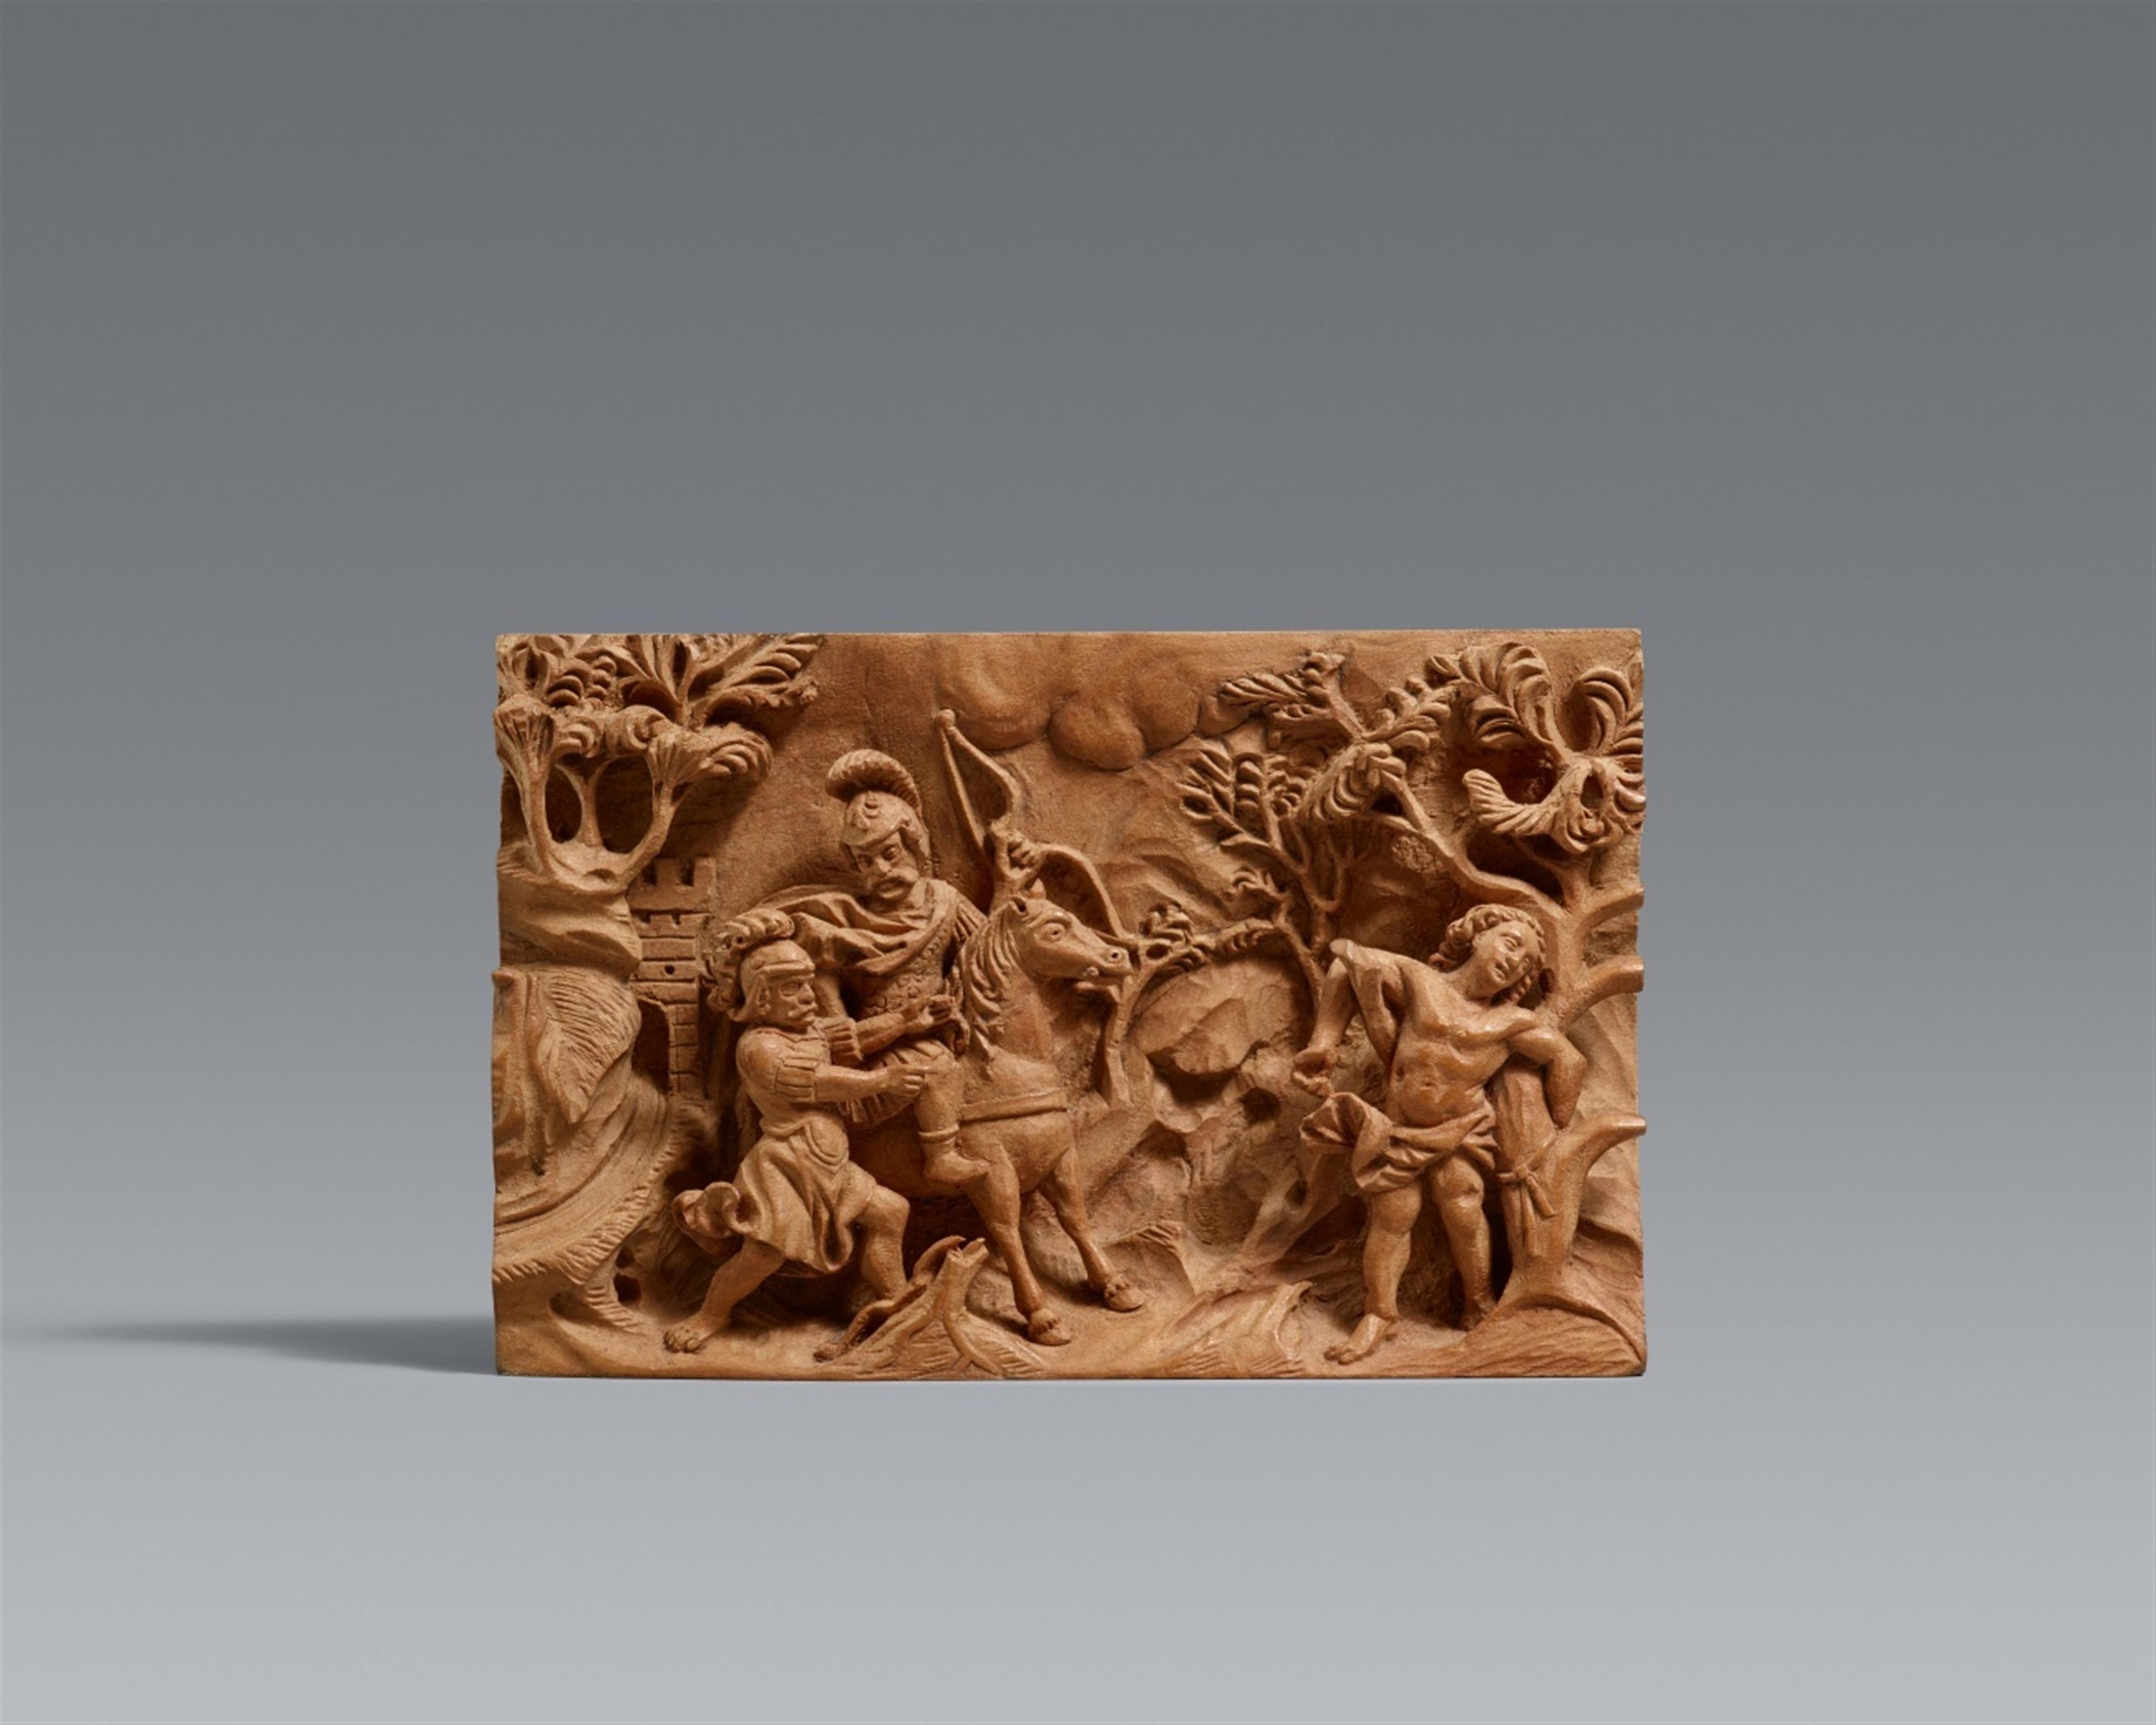 South German Early 18th century - An early 18th century South German carved boxwood relief with the Martyrdom of Saint Sebastian - image-1